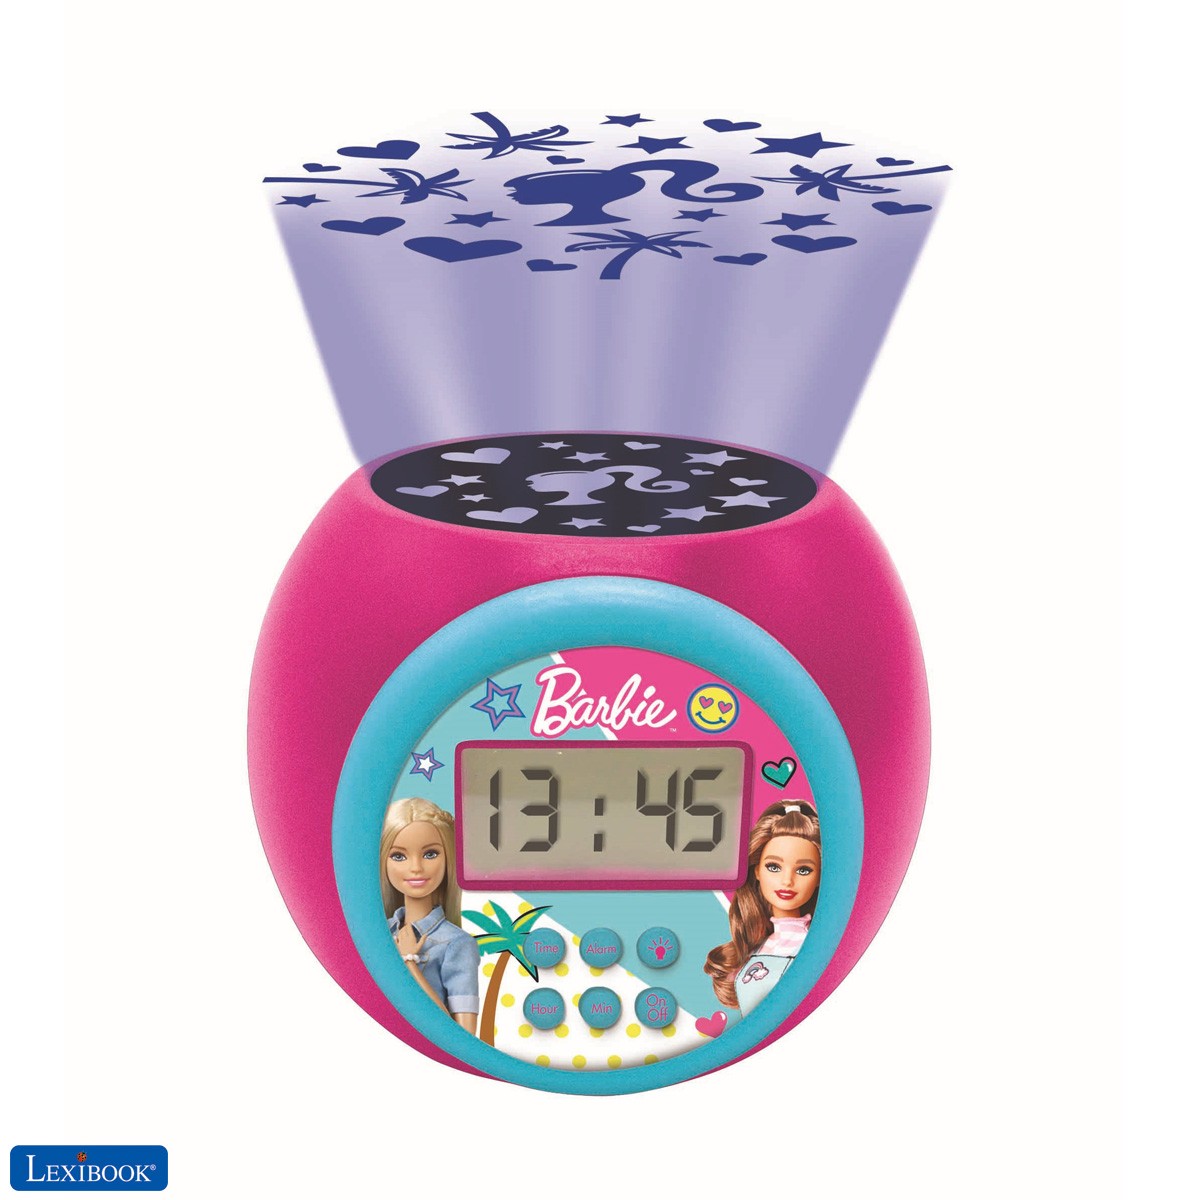 Projector Alarm Clock Barbie with snooze function and alarm function